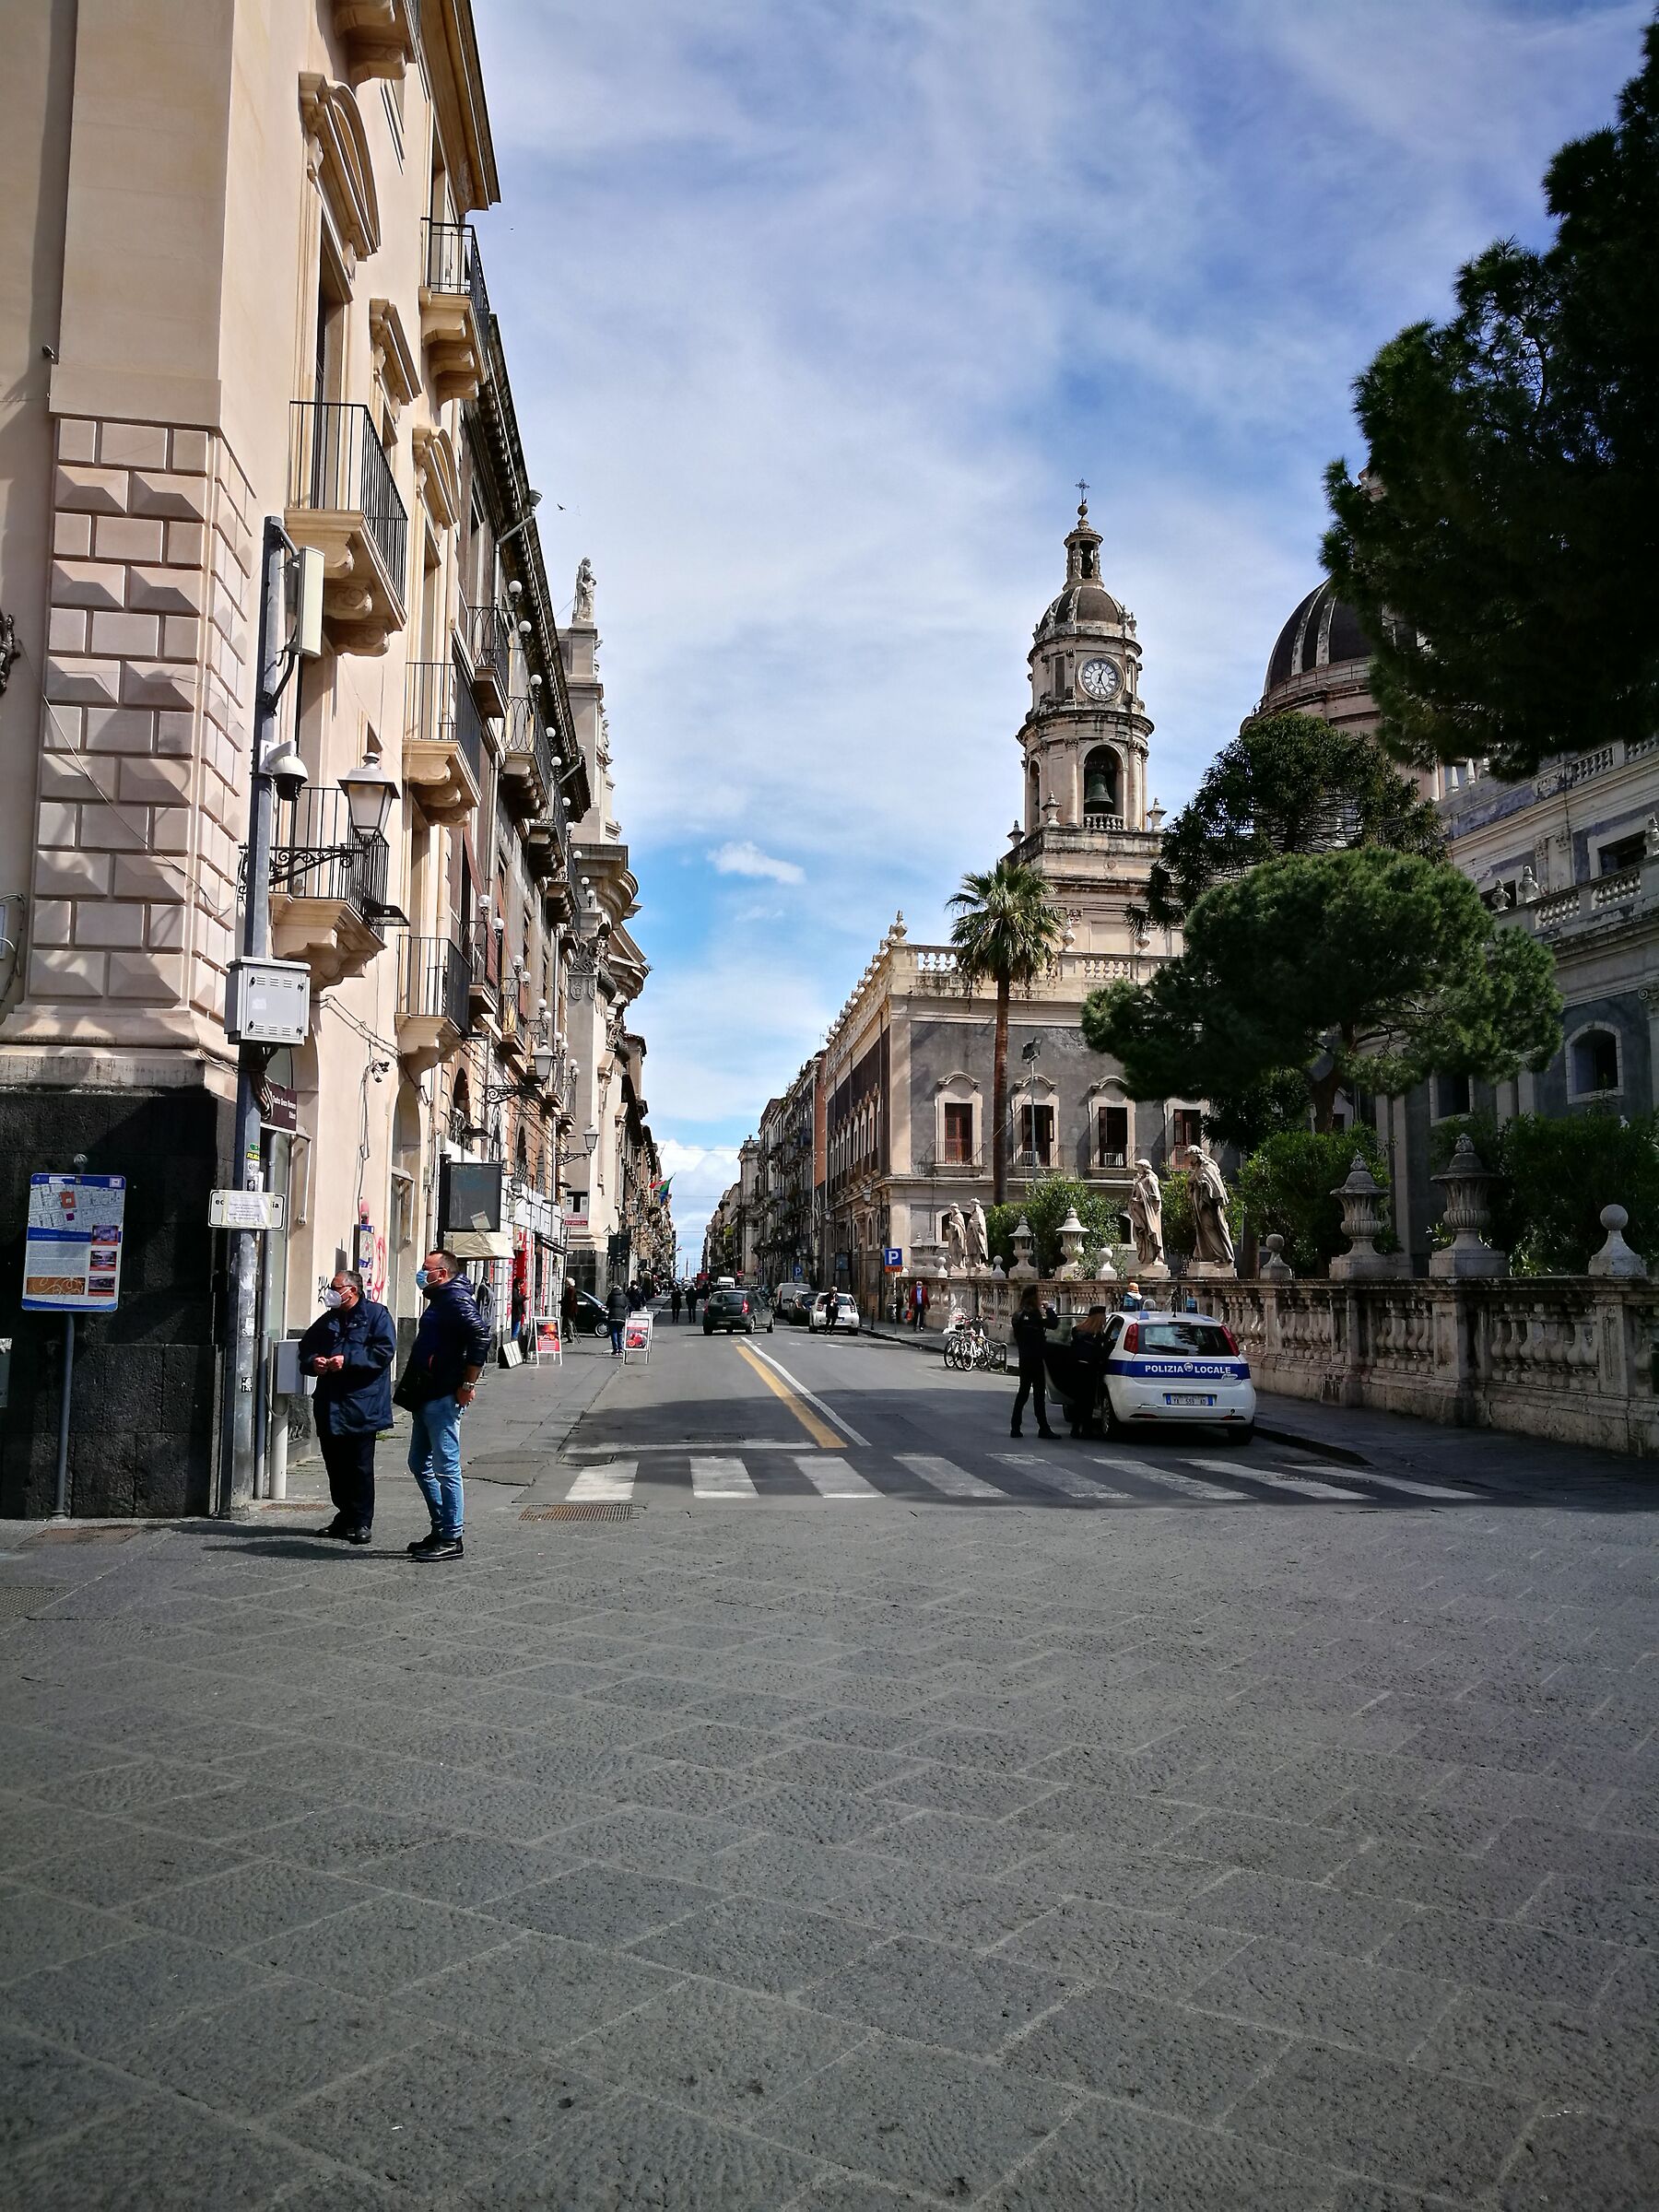 Catania in early spring...